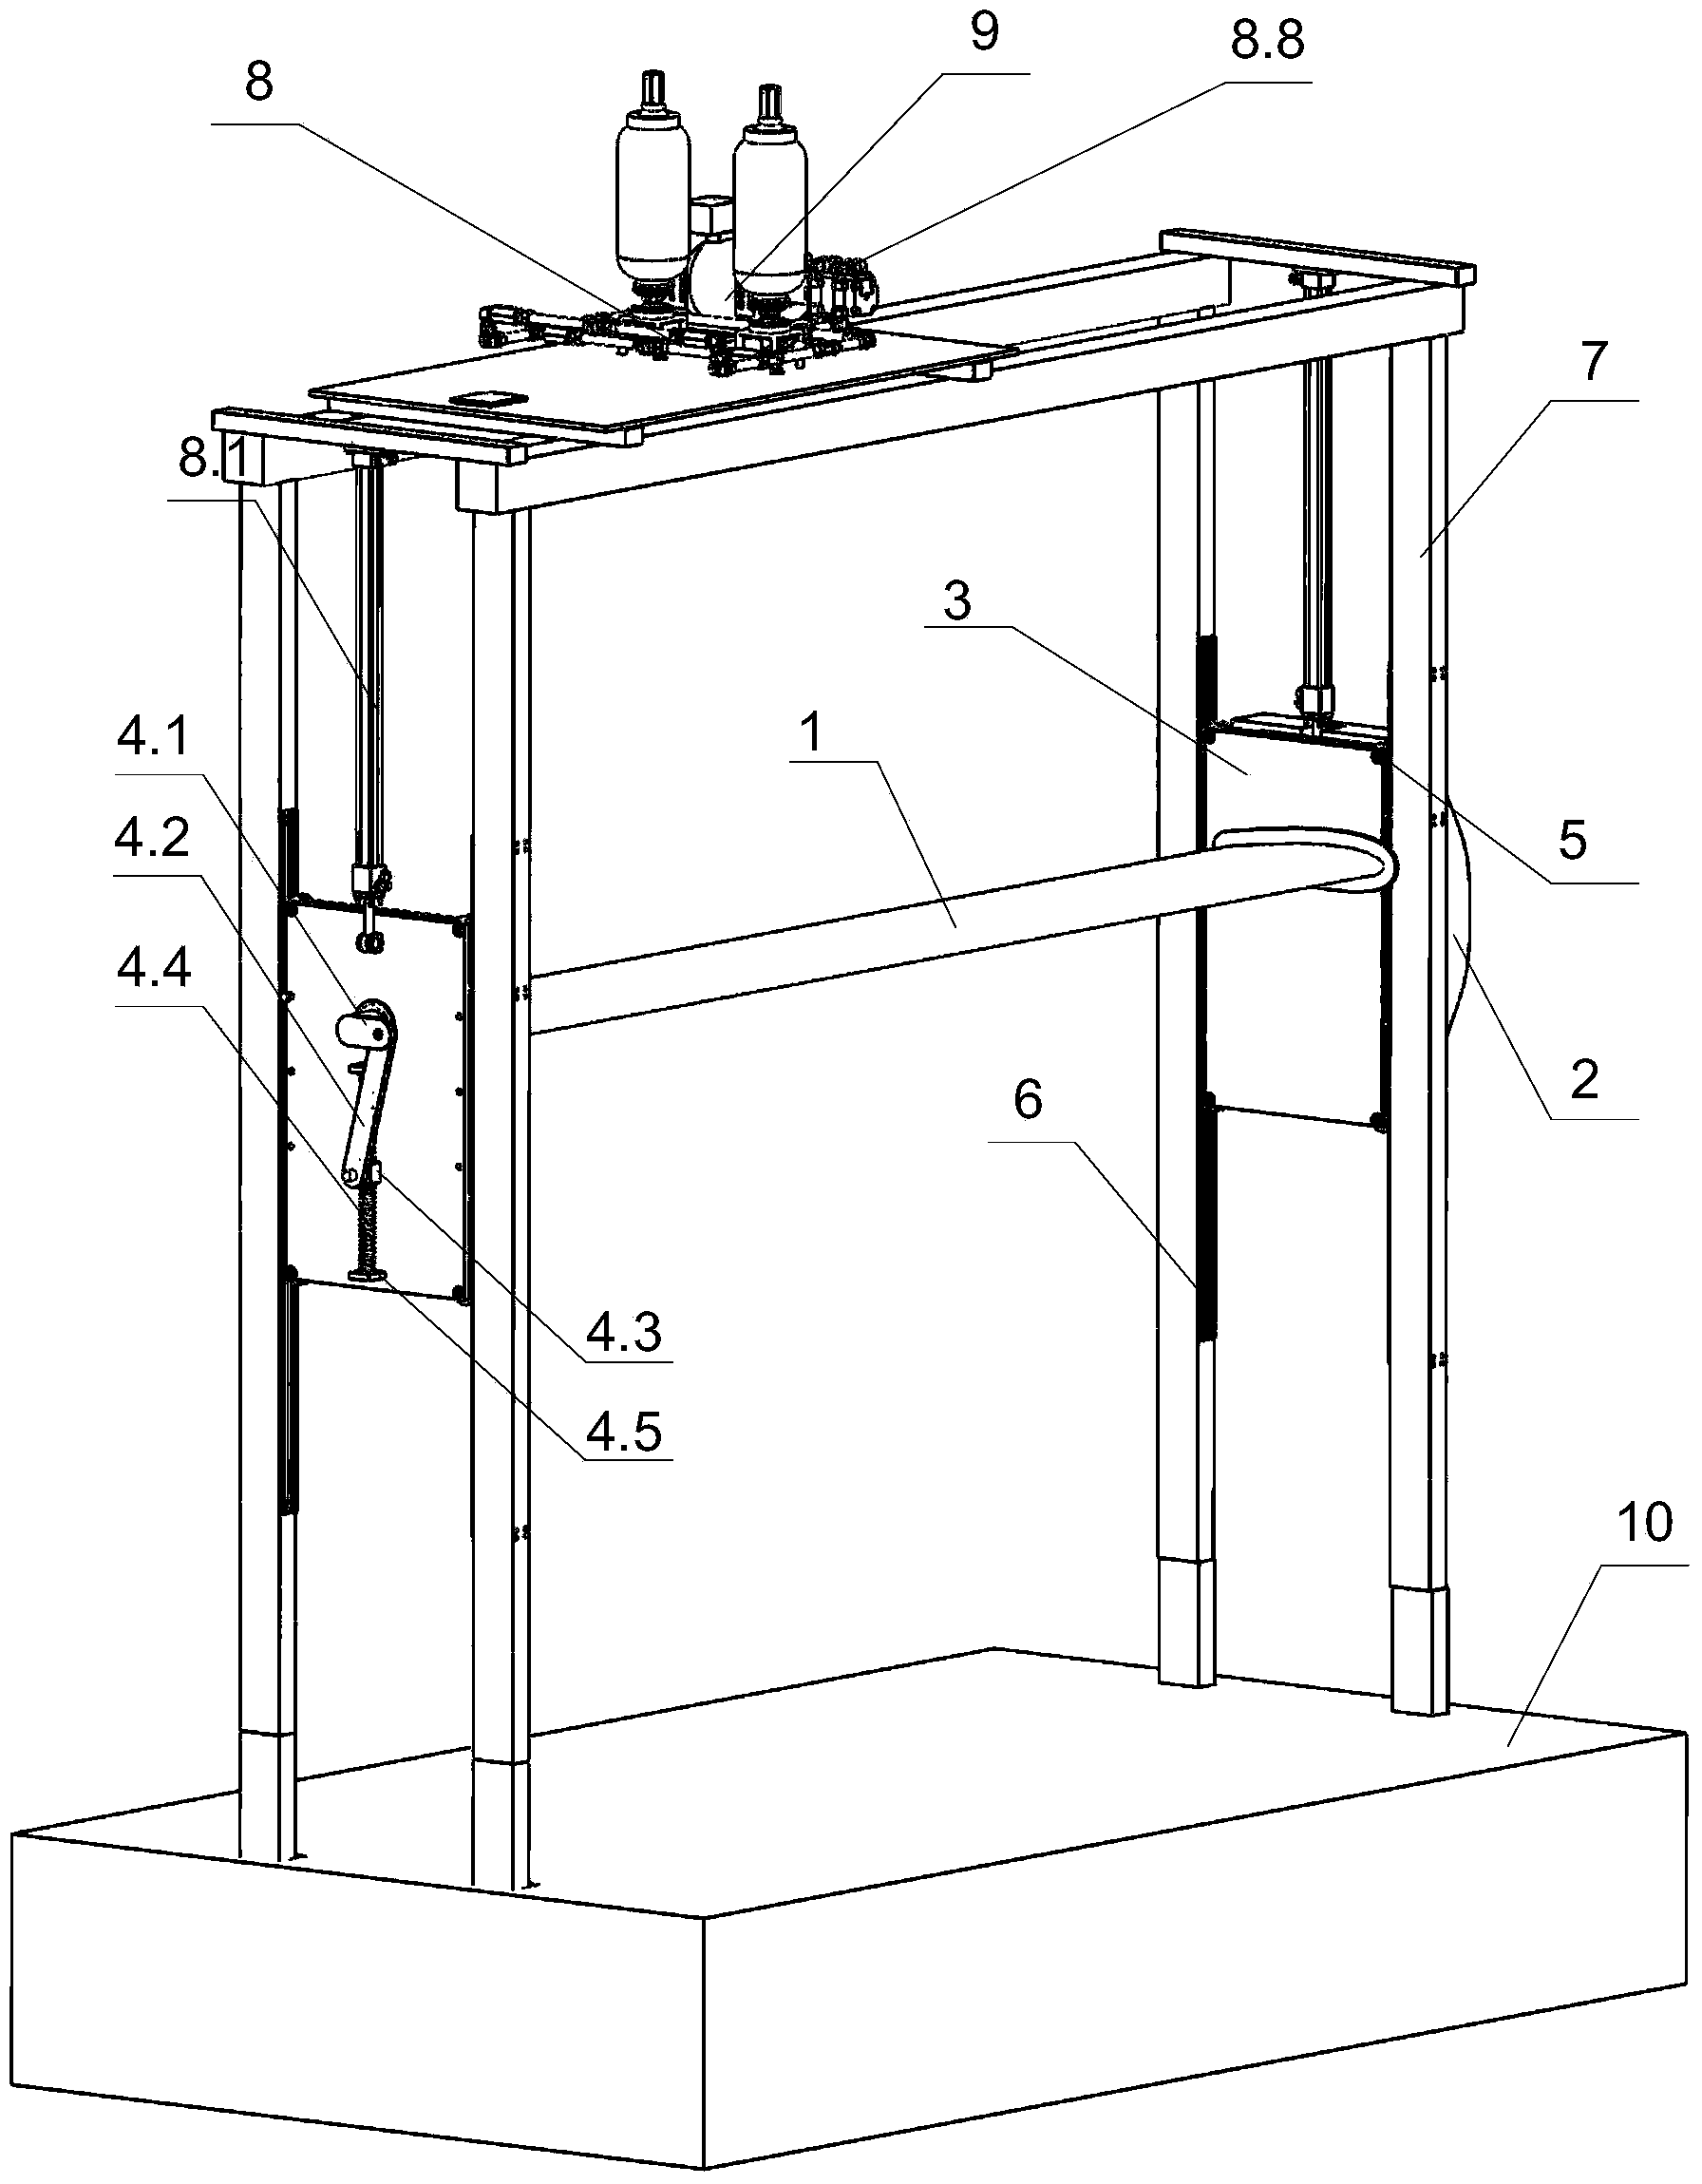 Power generation device using lift type oscillating hydrofoils to capture tidal current energy